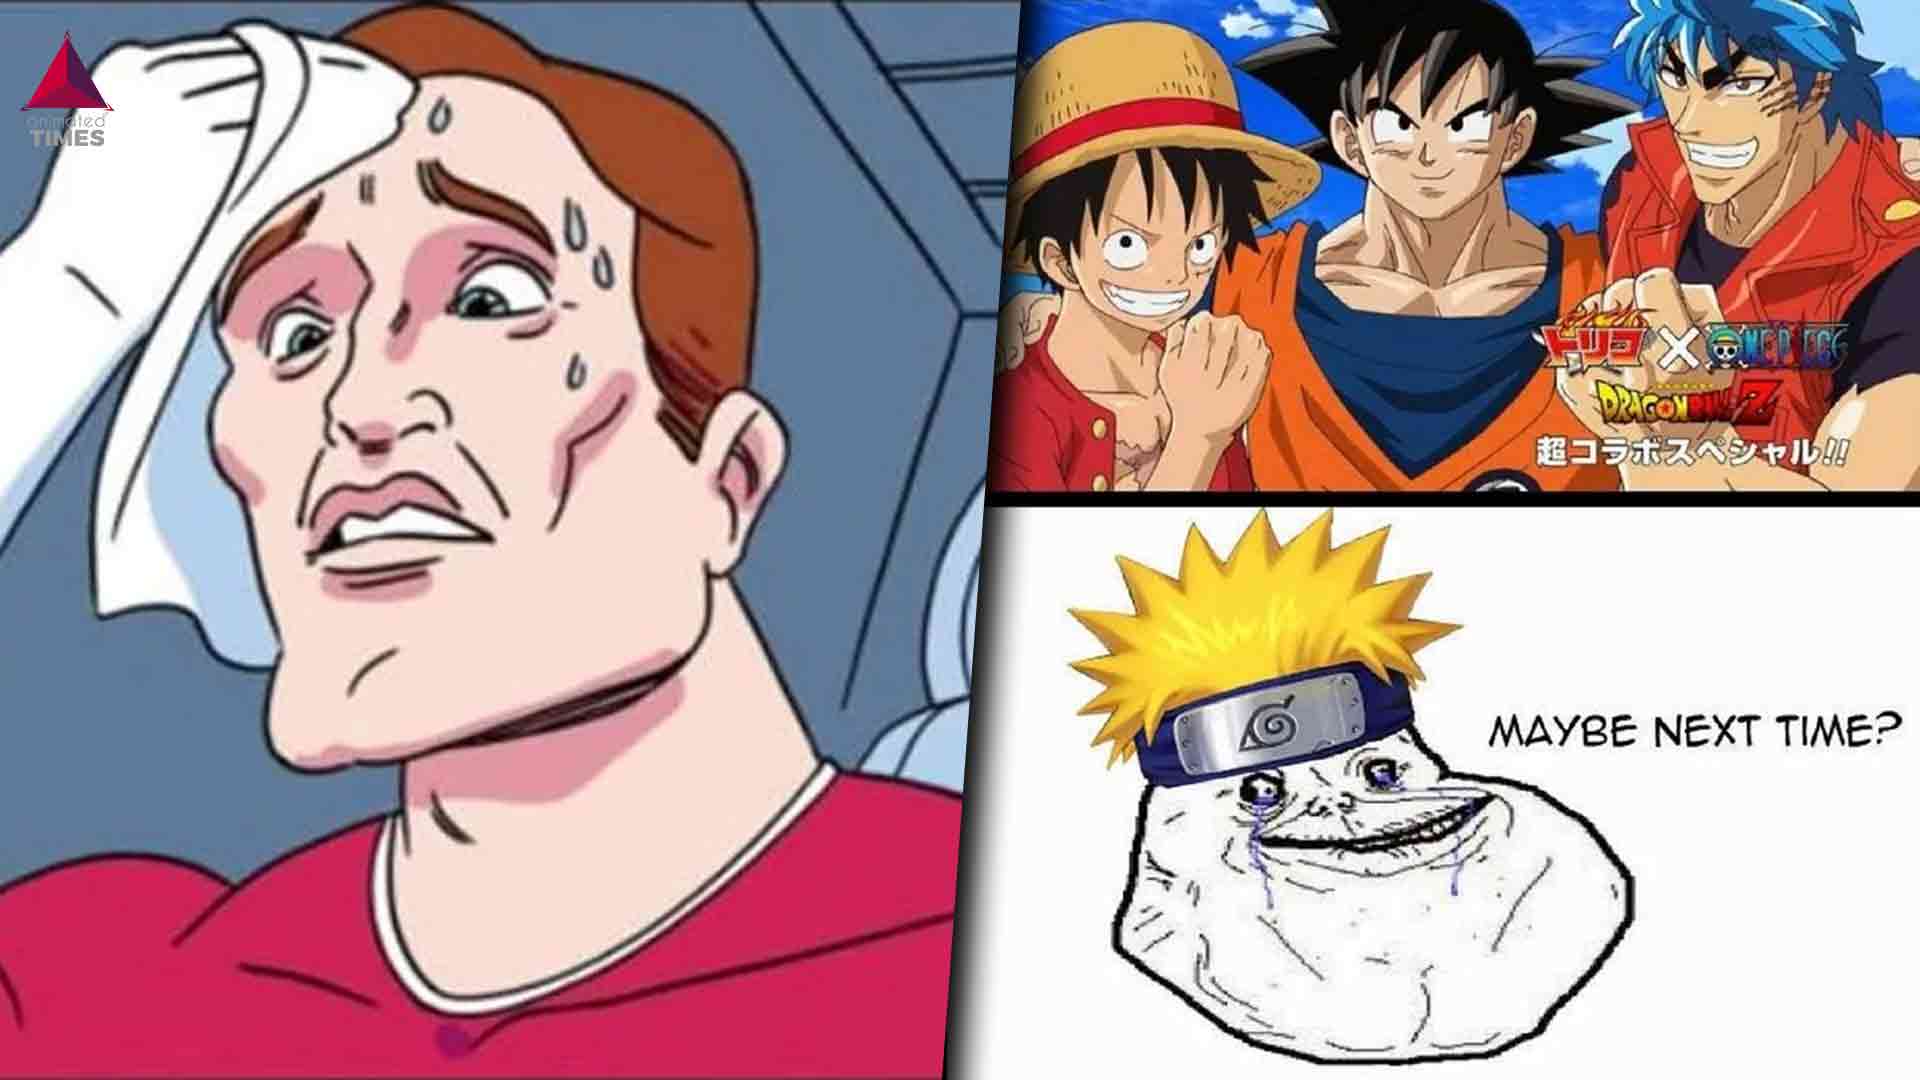 Naruto Vs One Piece Memes That Will Make You Choose One Side Animated Times